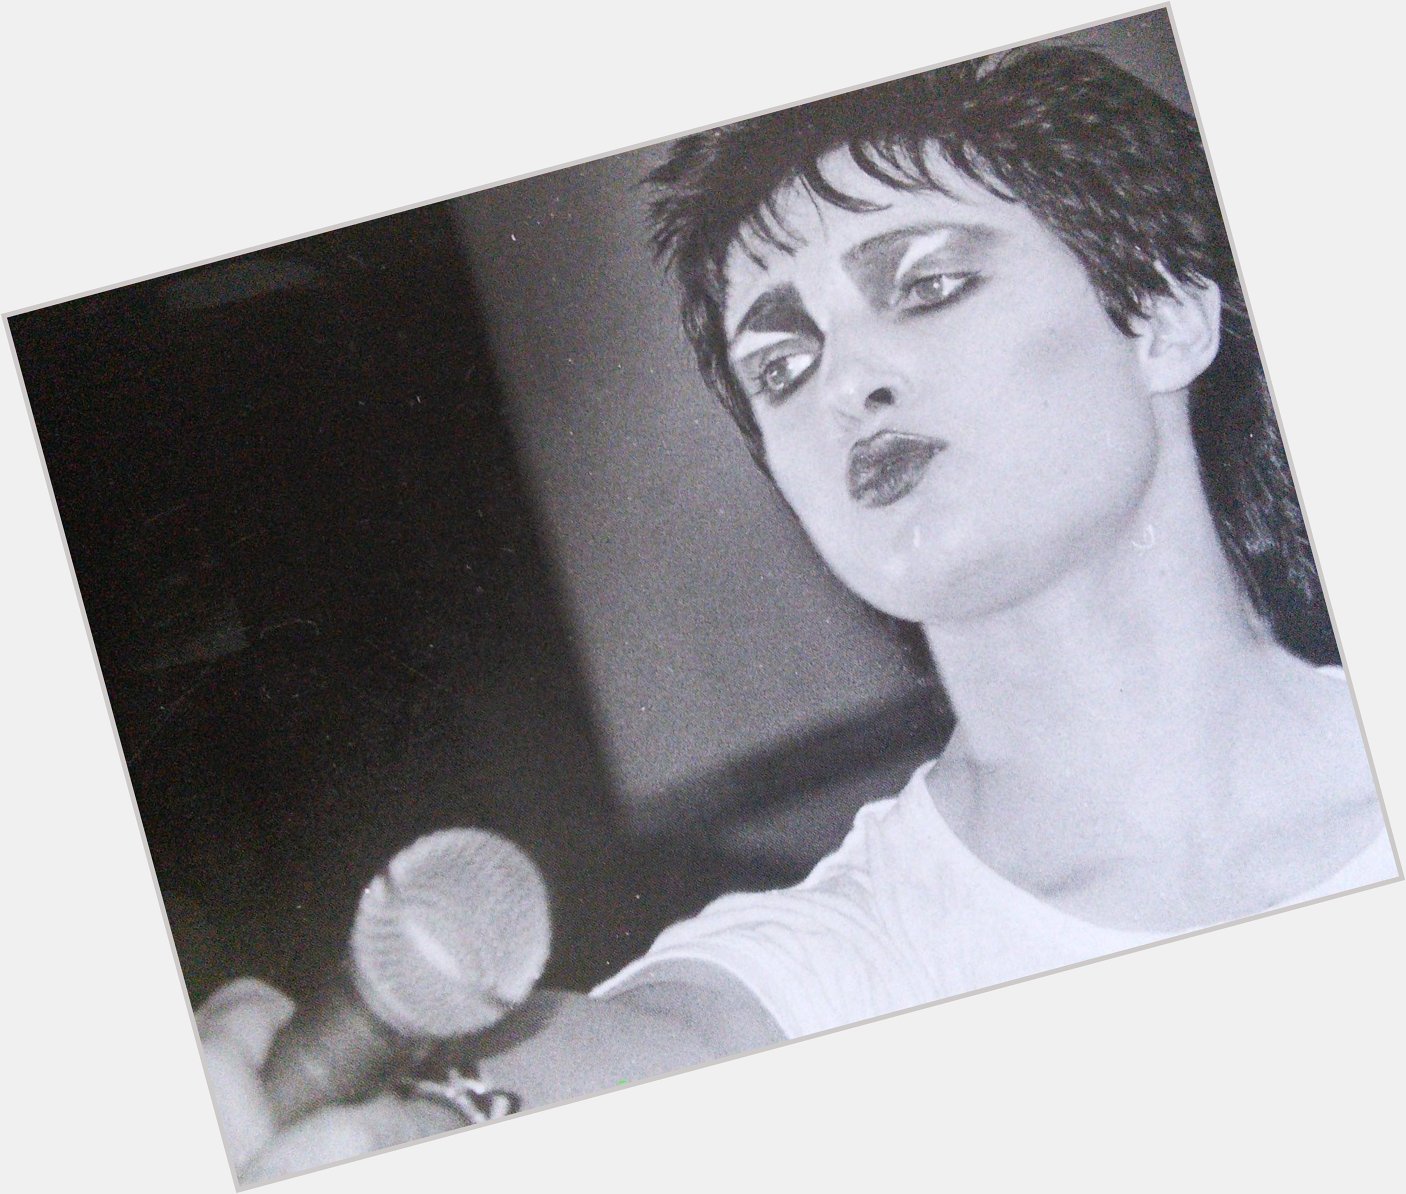 HAPPY 60th BIRTHDAY To SIOUXSIE SIOUX From First Gig To Last NEVER Dull! 